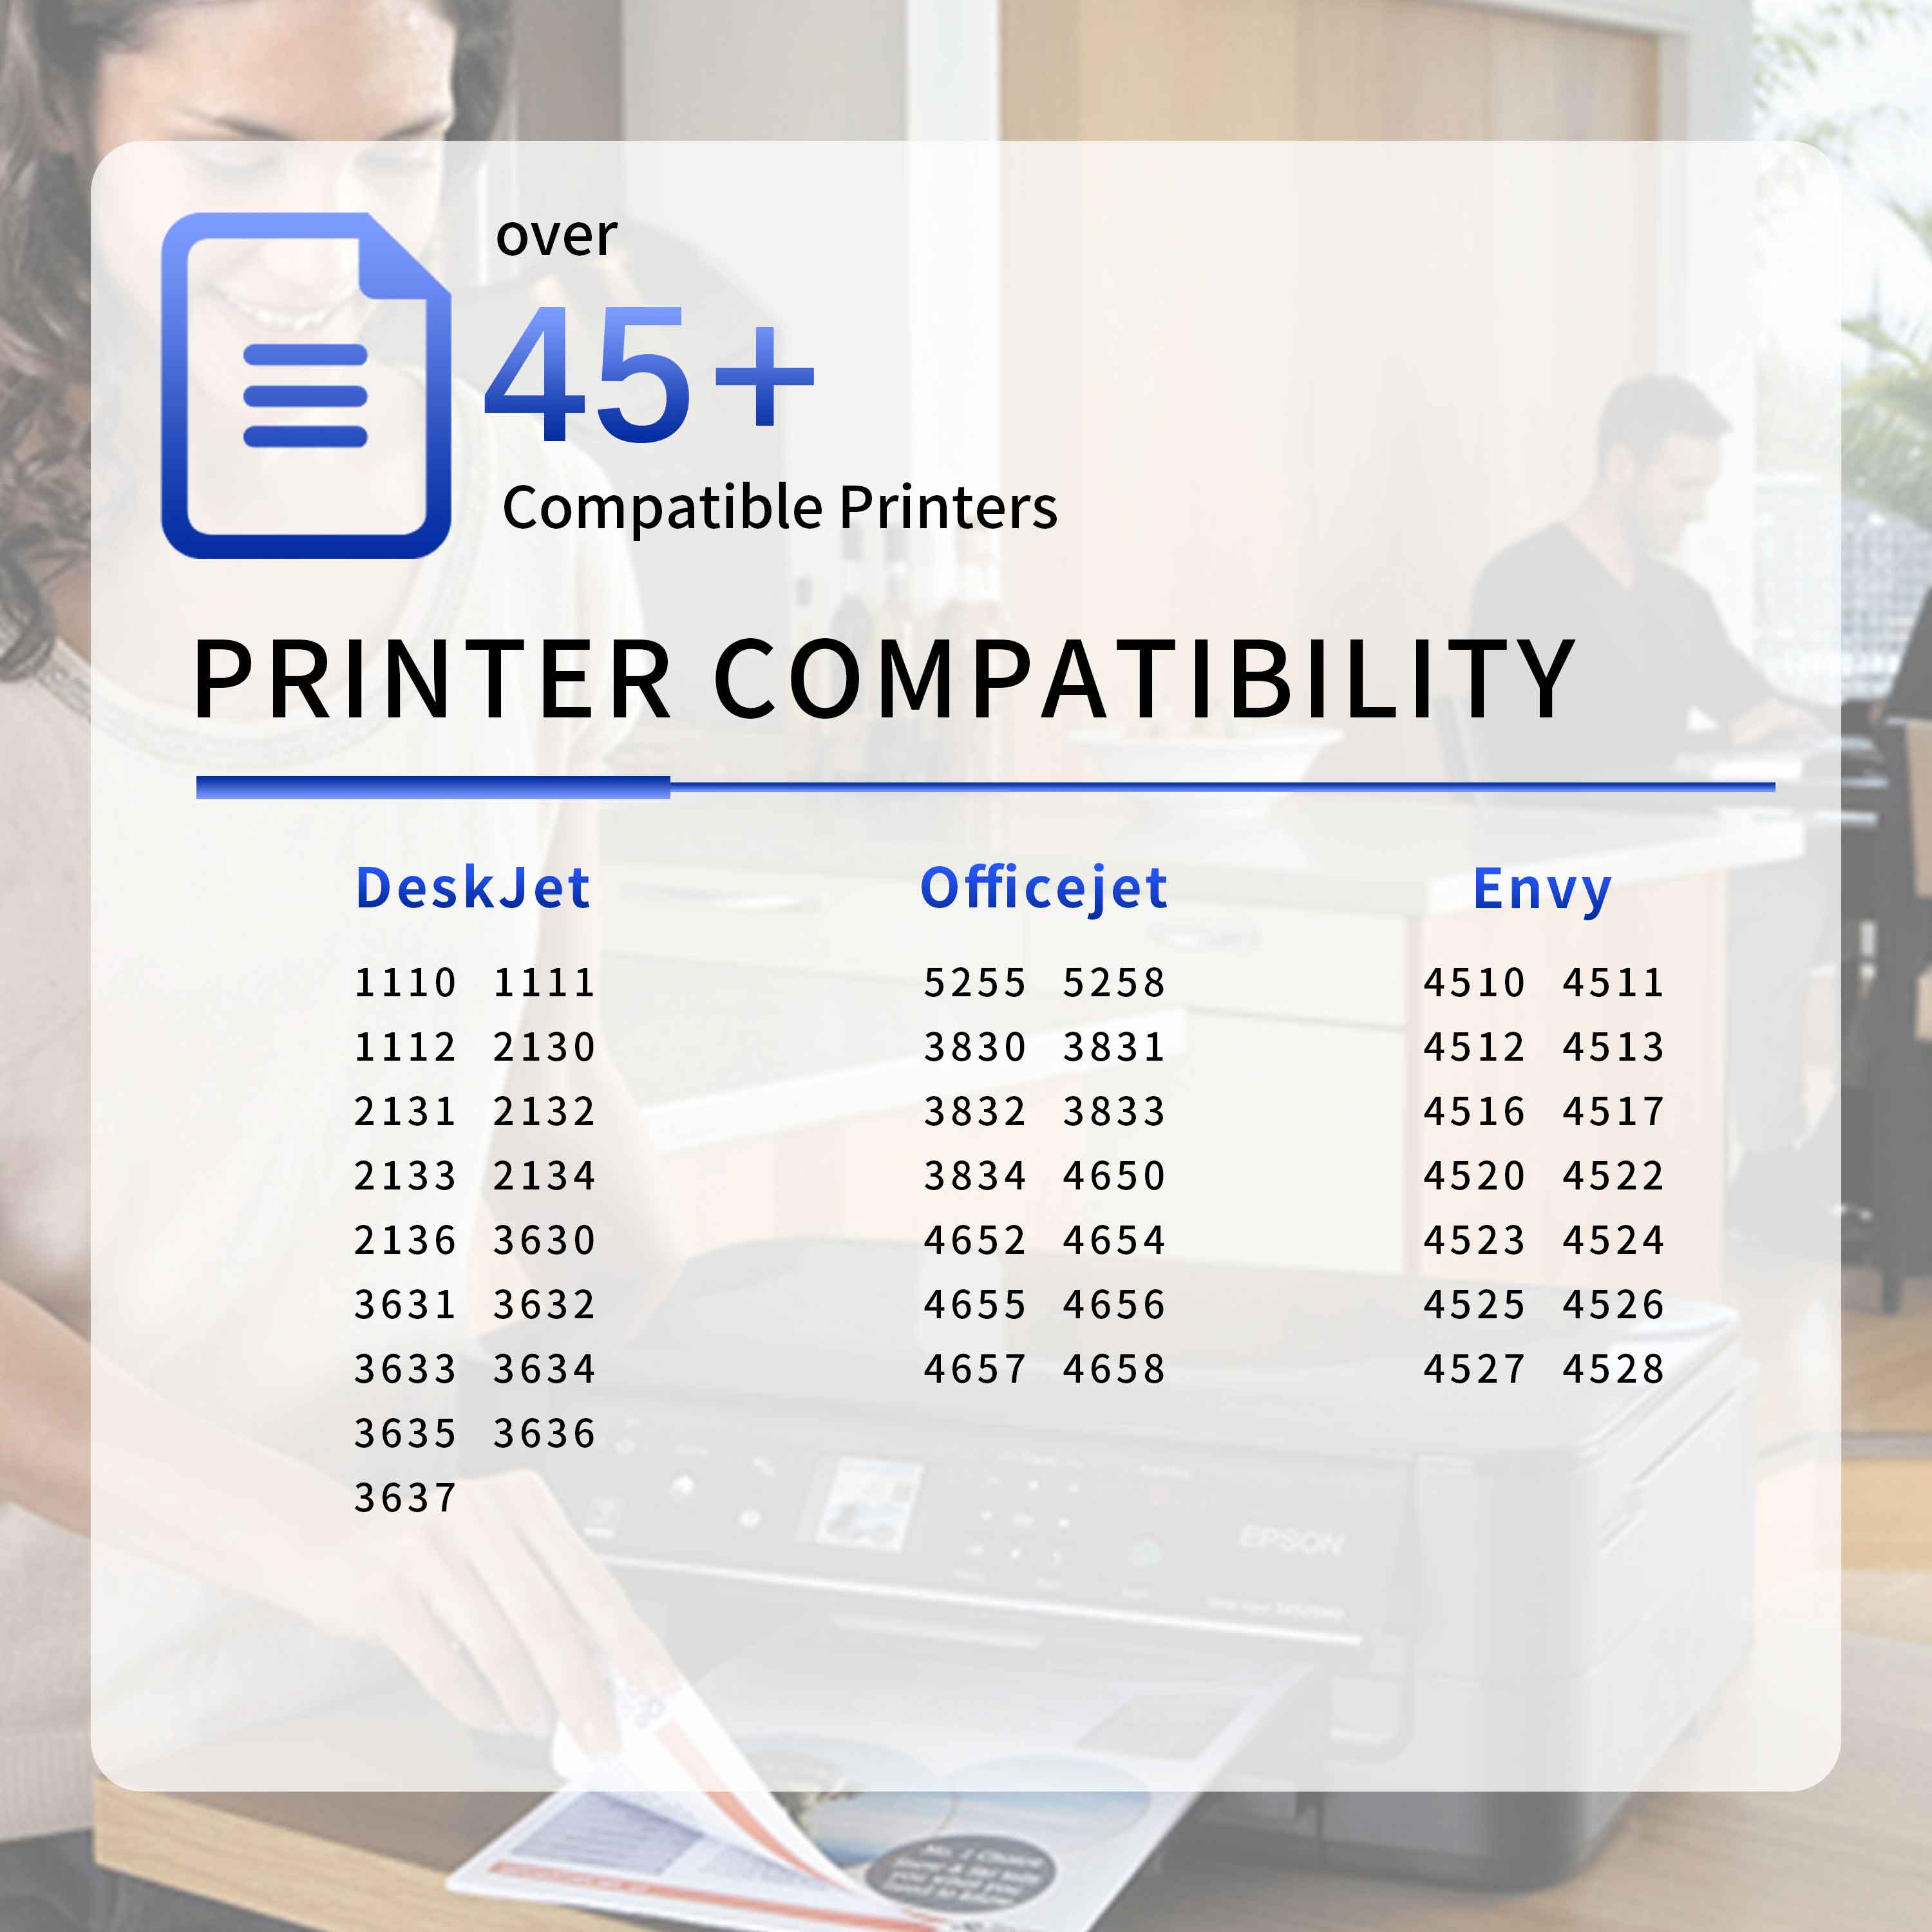 Re-manufactured HP Ink Cartridge Replacement for 63 XL Black and Tri-Color Combo Compatible with Envy 4520 4512 4516 4522 Officejet 3831 4655 Deskjet 1110 2130 3630 3632 printer